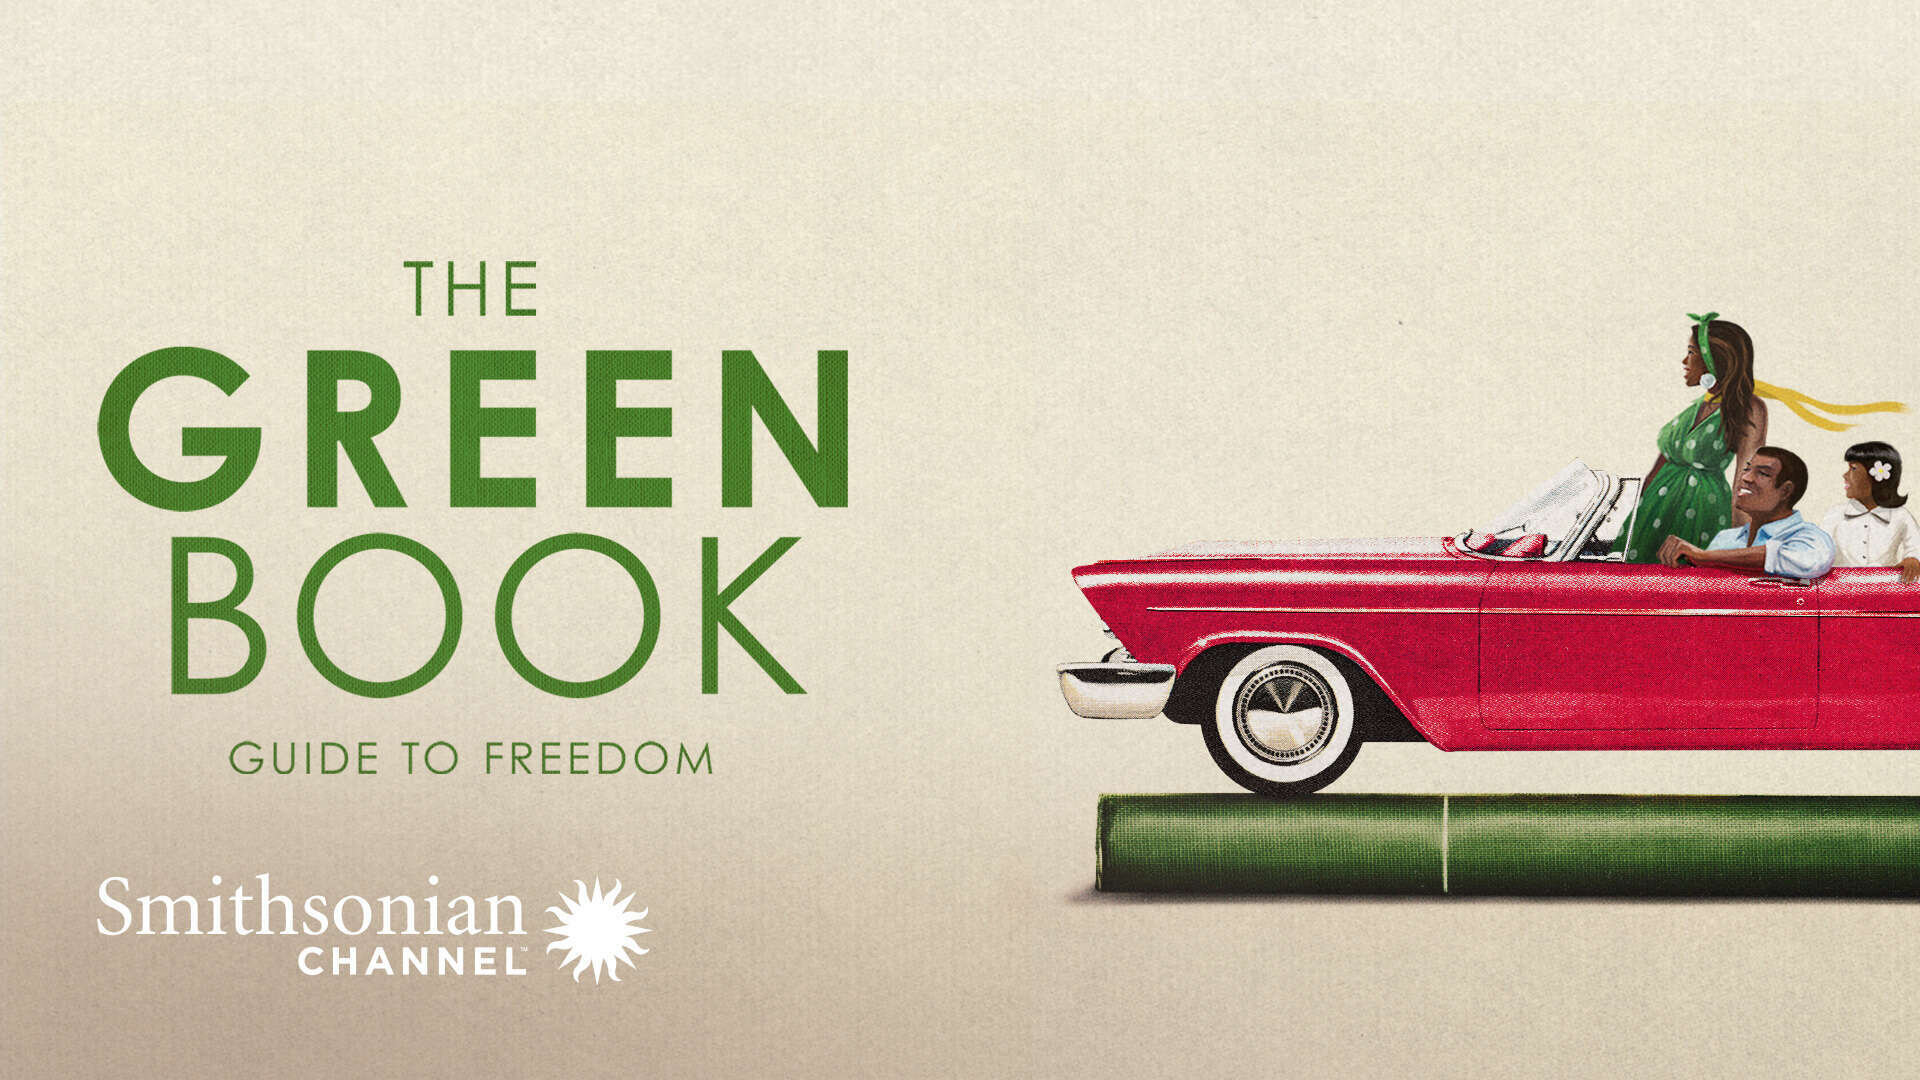 green book guide to freedom smithsonian channel documentary showing